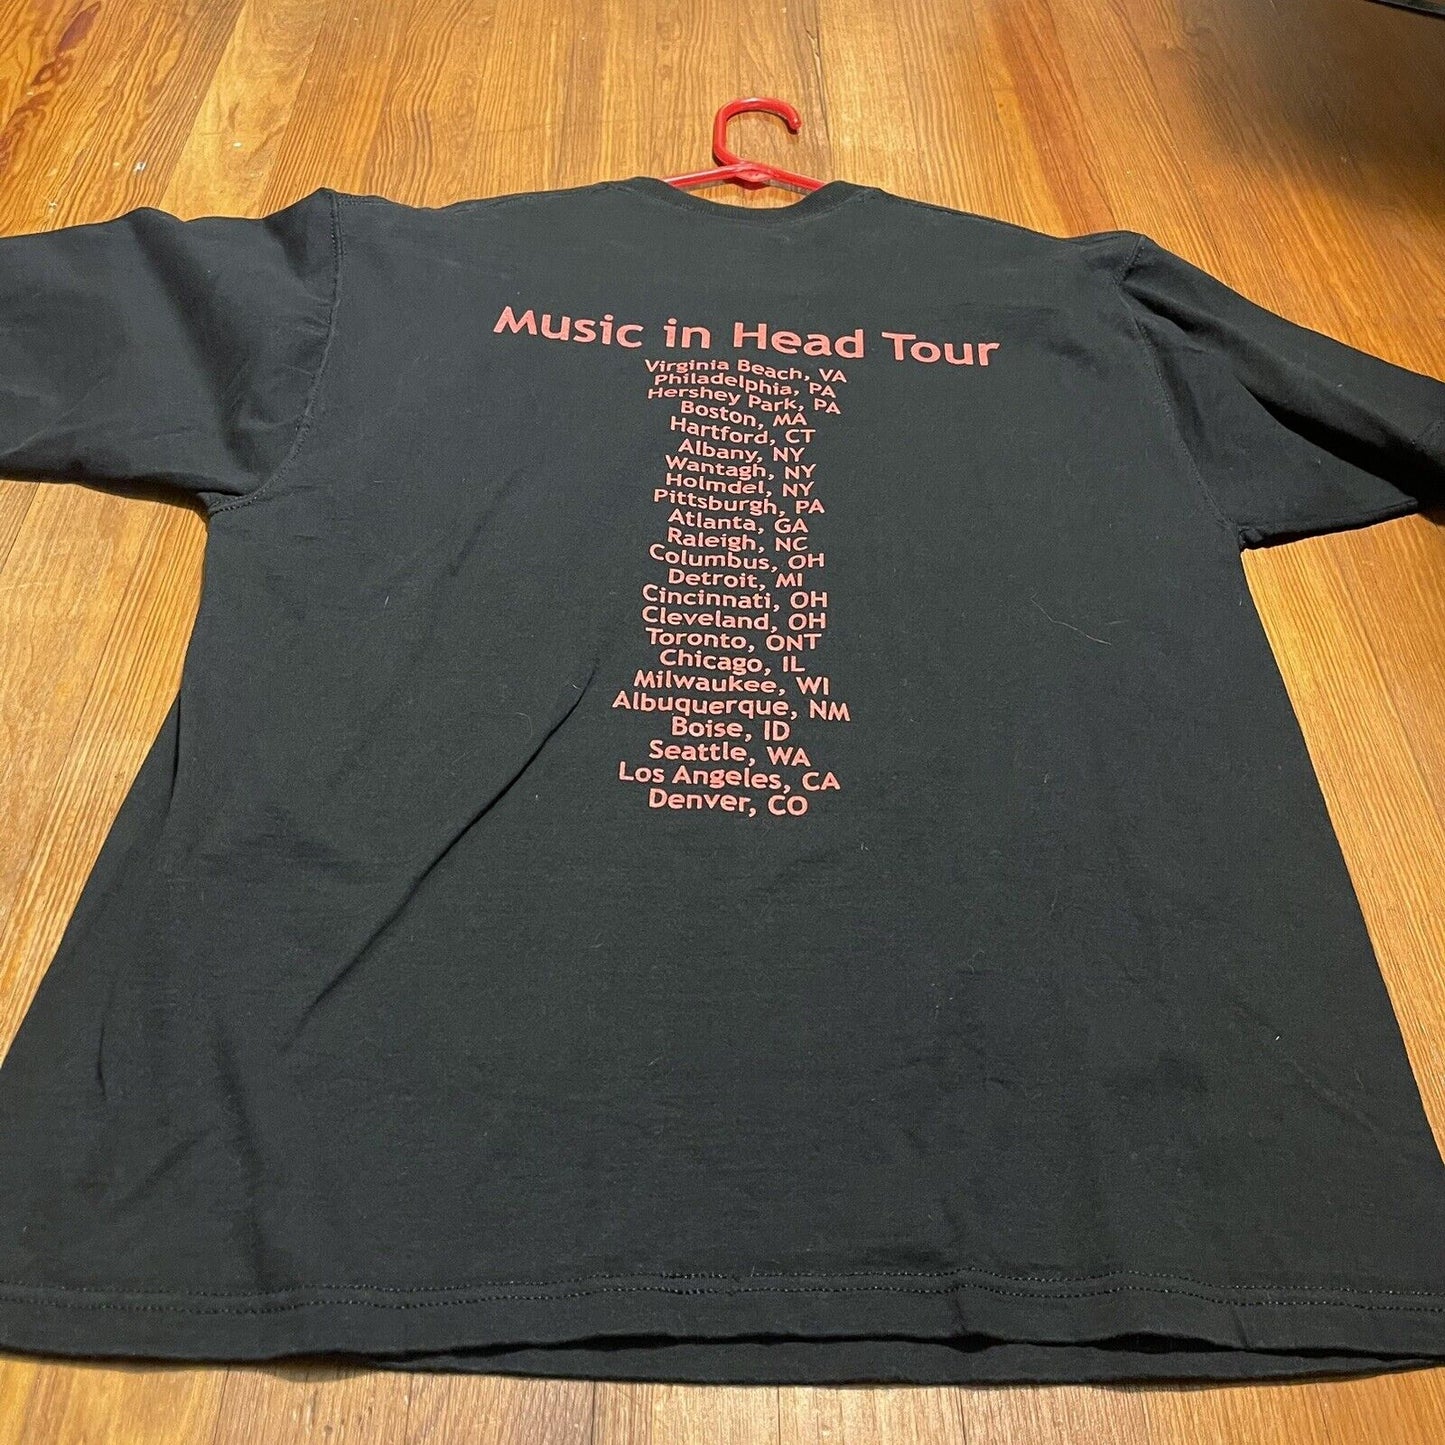 Vintage 2000 Anvil Neil Young Music In Head Tour Shirt Sleeve Shirt Size Large